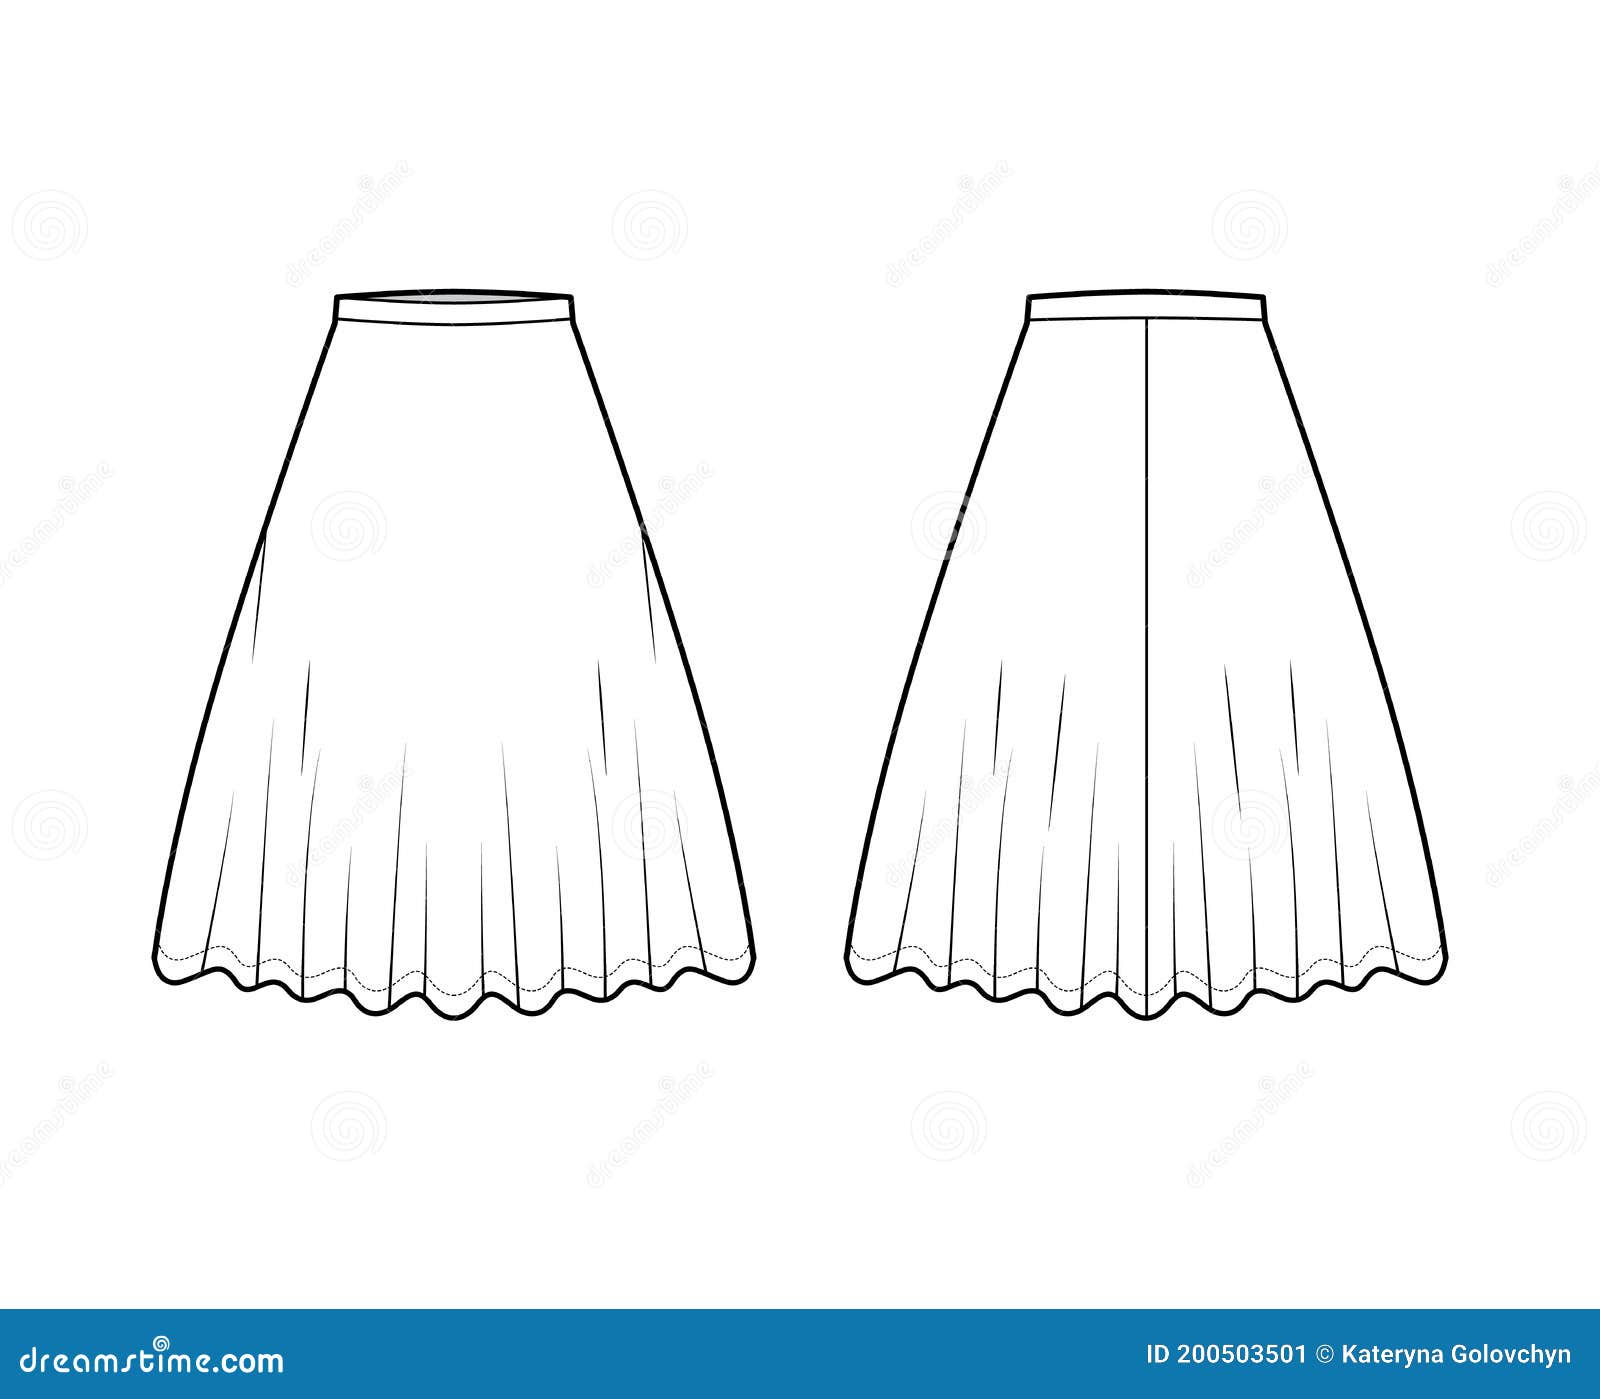 Skirt Midi Round Technical Fashion Illustration with Knee Lengths ...